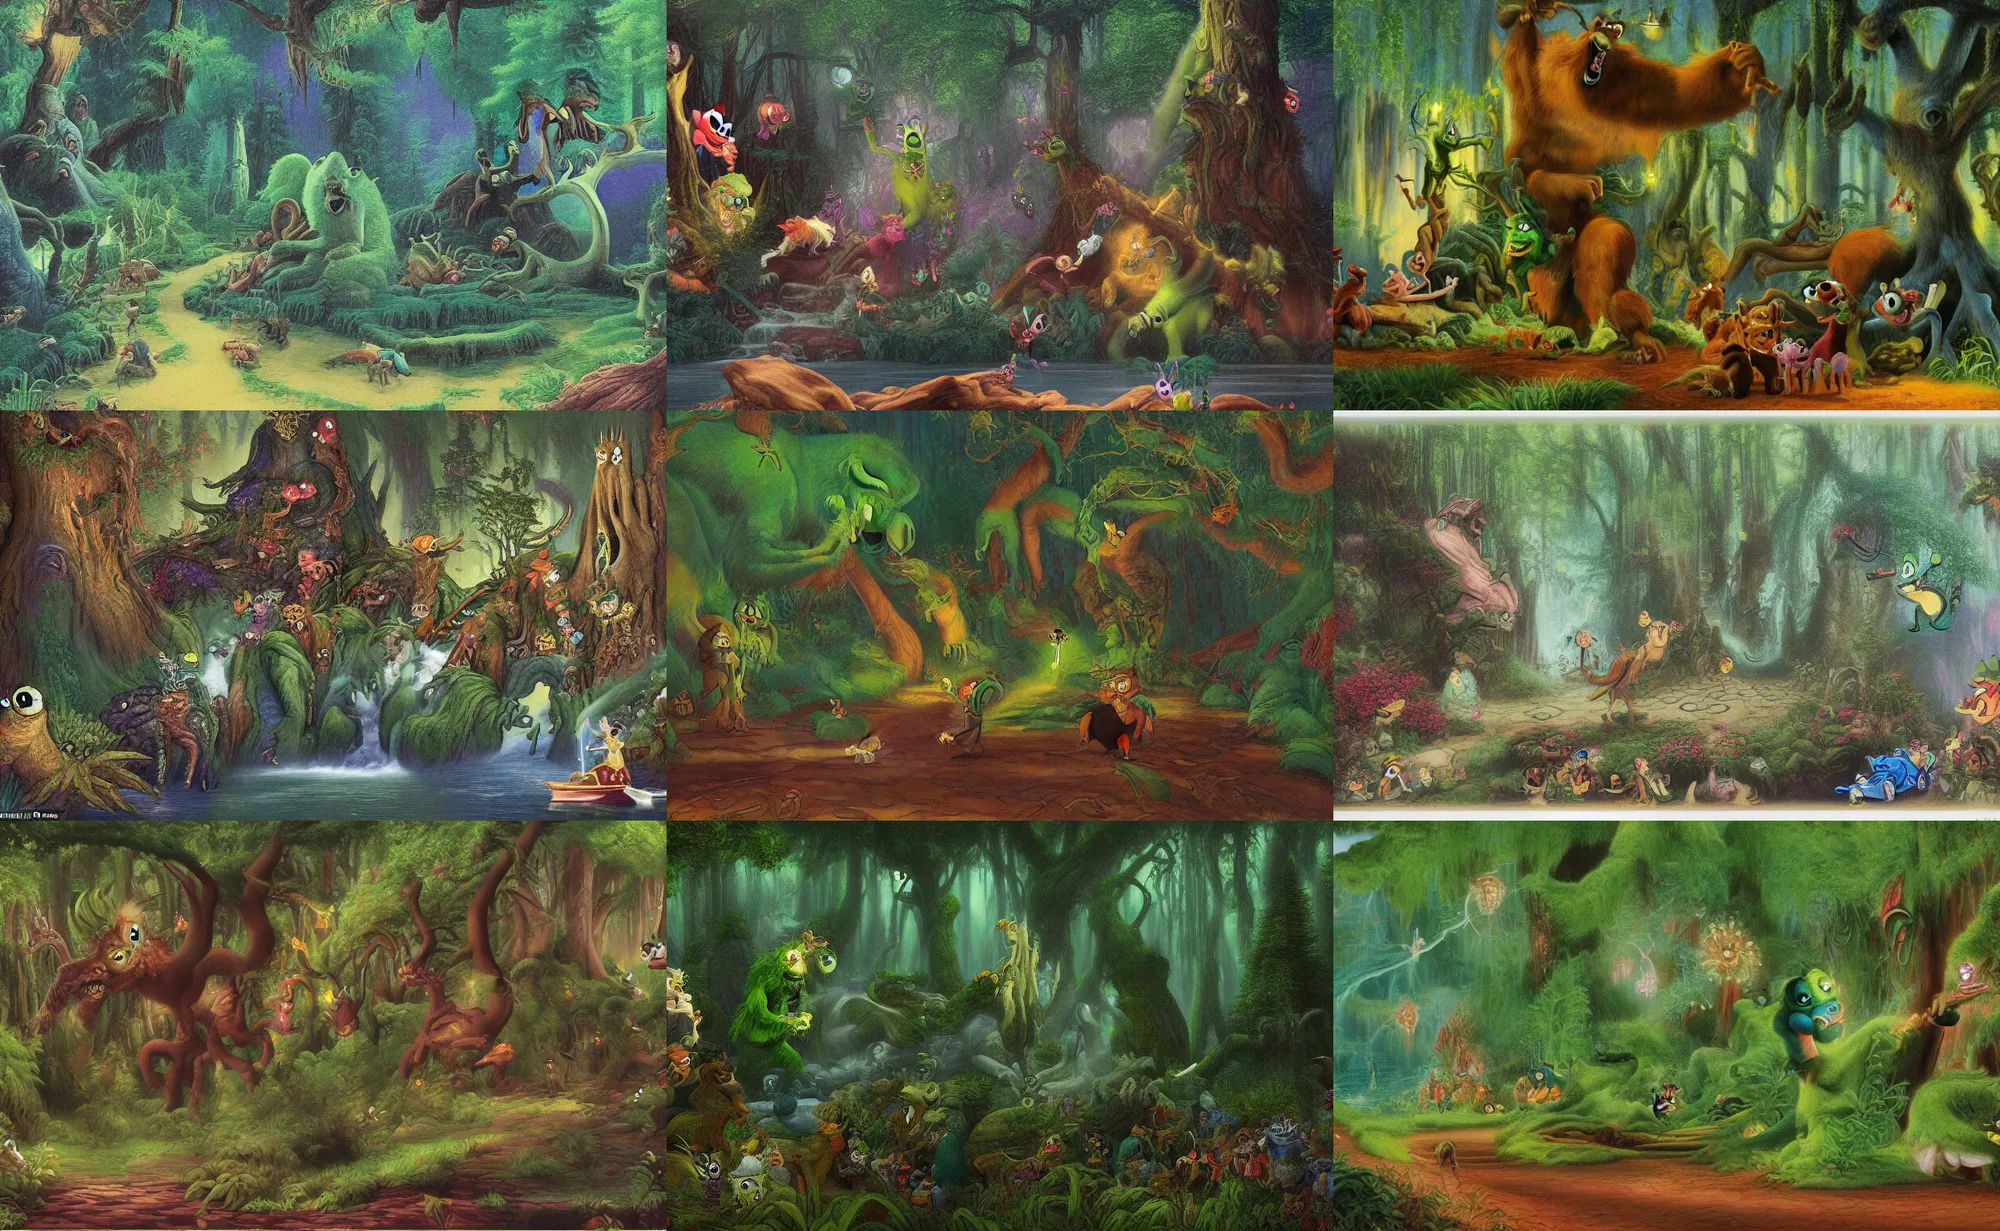 Prompt: Movie frame from the Monster energy drink coloured Disney animated motion picture released in 1937, beautiful enchanted forest full of Monster energy drink critters, directed by Walt Disney energy drink, highly detailed background paintings by Thomas Kinkade, Monster energy drink monster energy drink monster energy drink